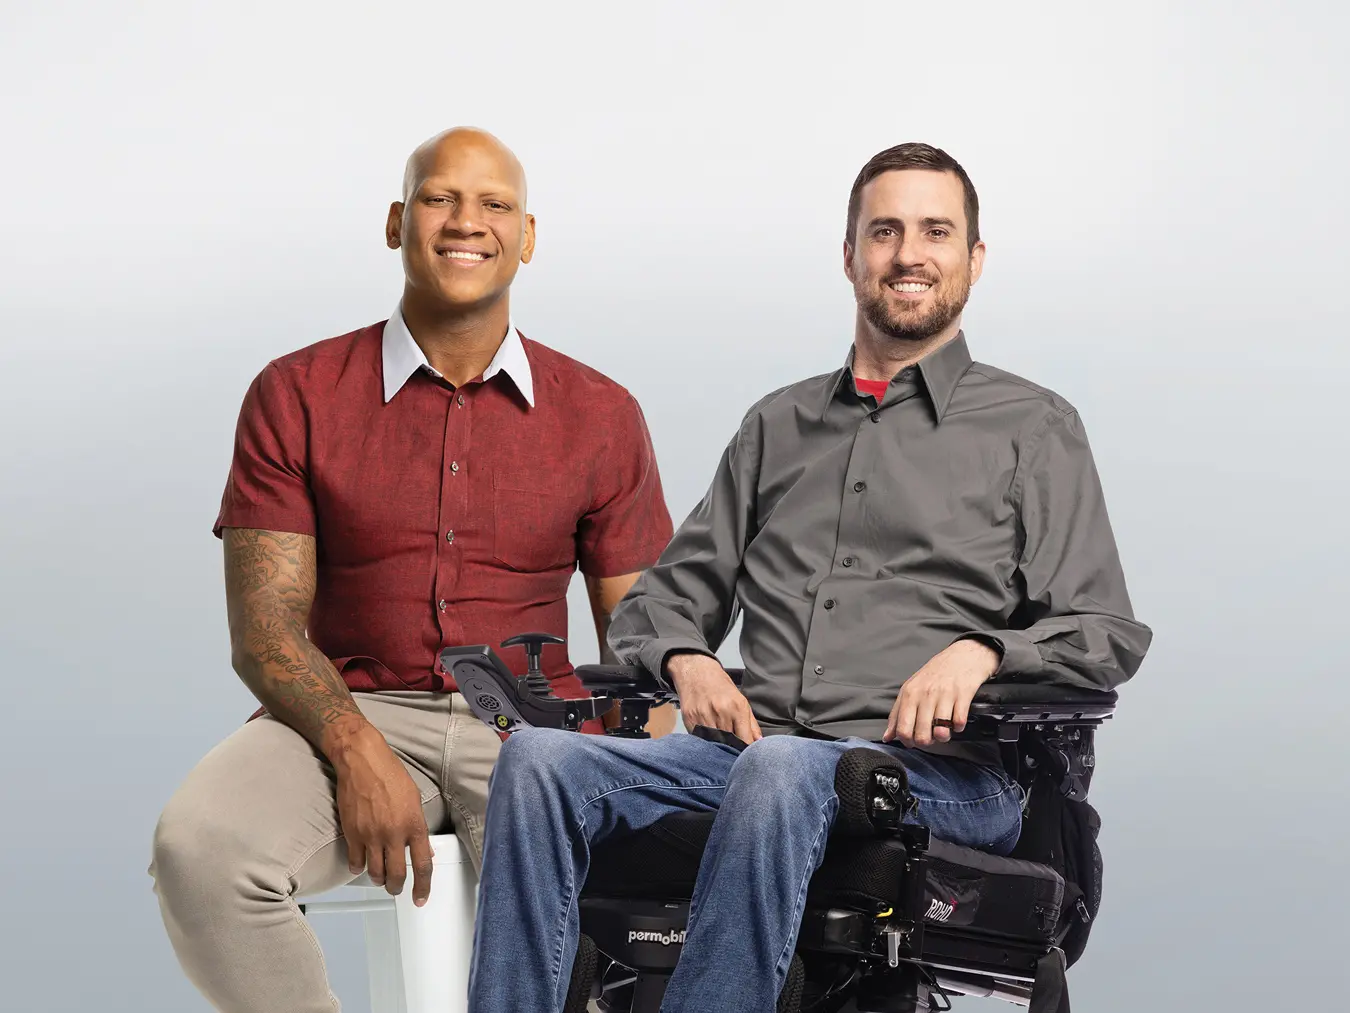 Two men sit next to each other smiling. On the left is a Black man on a stool wearing a short-sleeved button-down short that shows tattoos on his arms, a watch and shiny wedding ring. He casually rests his hands on his legs. On the right, a white bearded man in a motorized wheelchair wears a button-down shirt and a dark wedding ring.